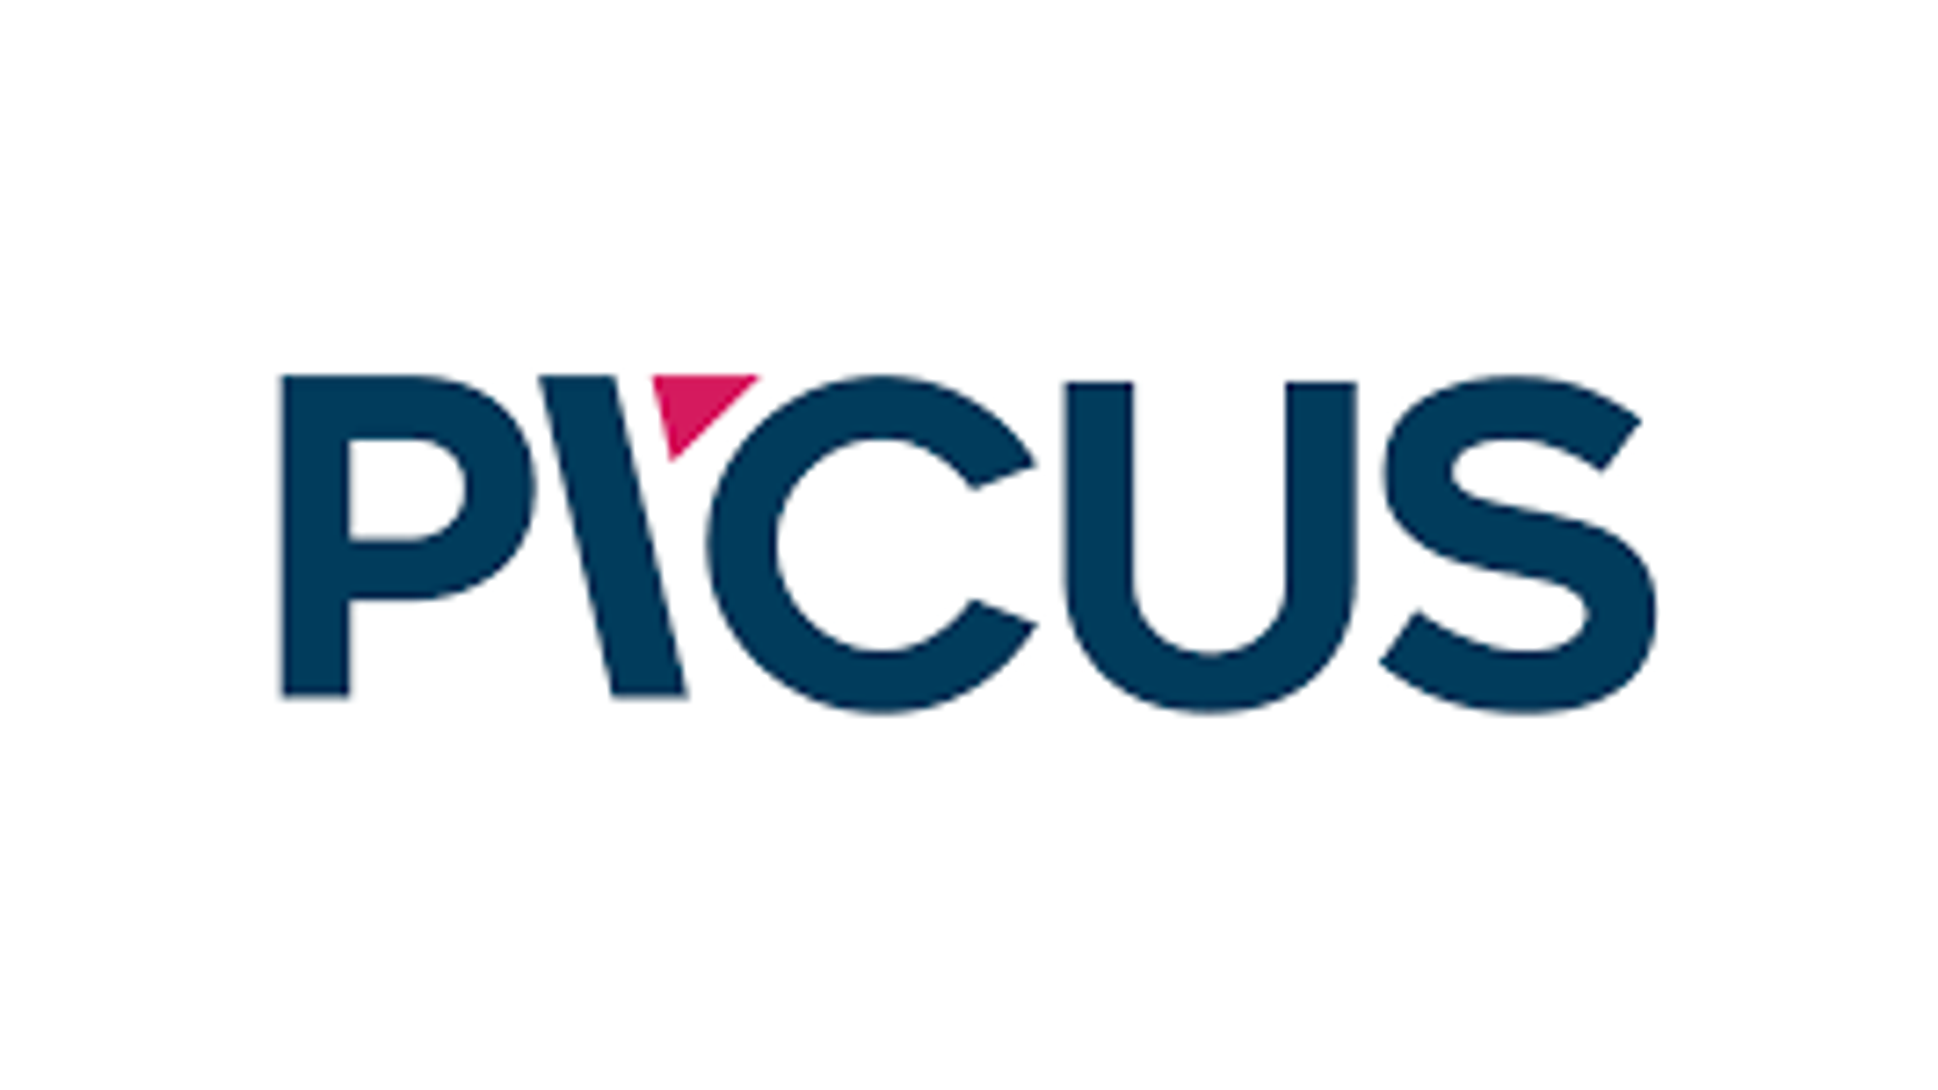 Validate your Security Controls with The Picus Complete Security Control Validation Platform